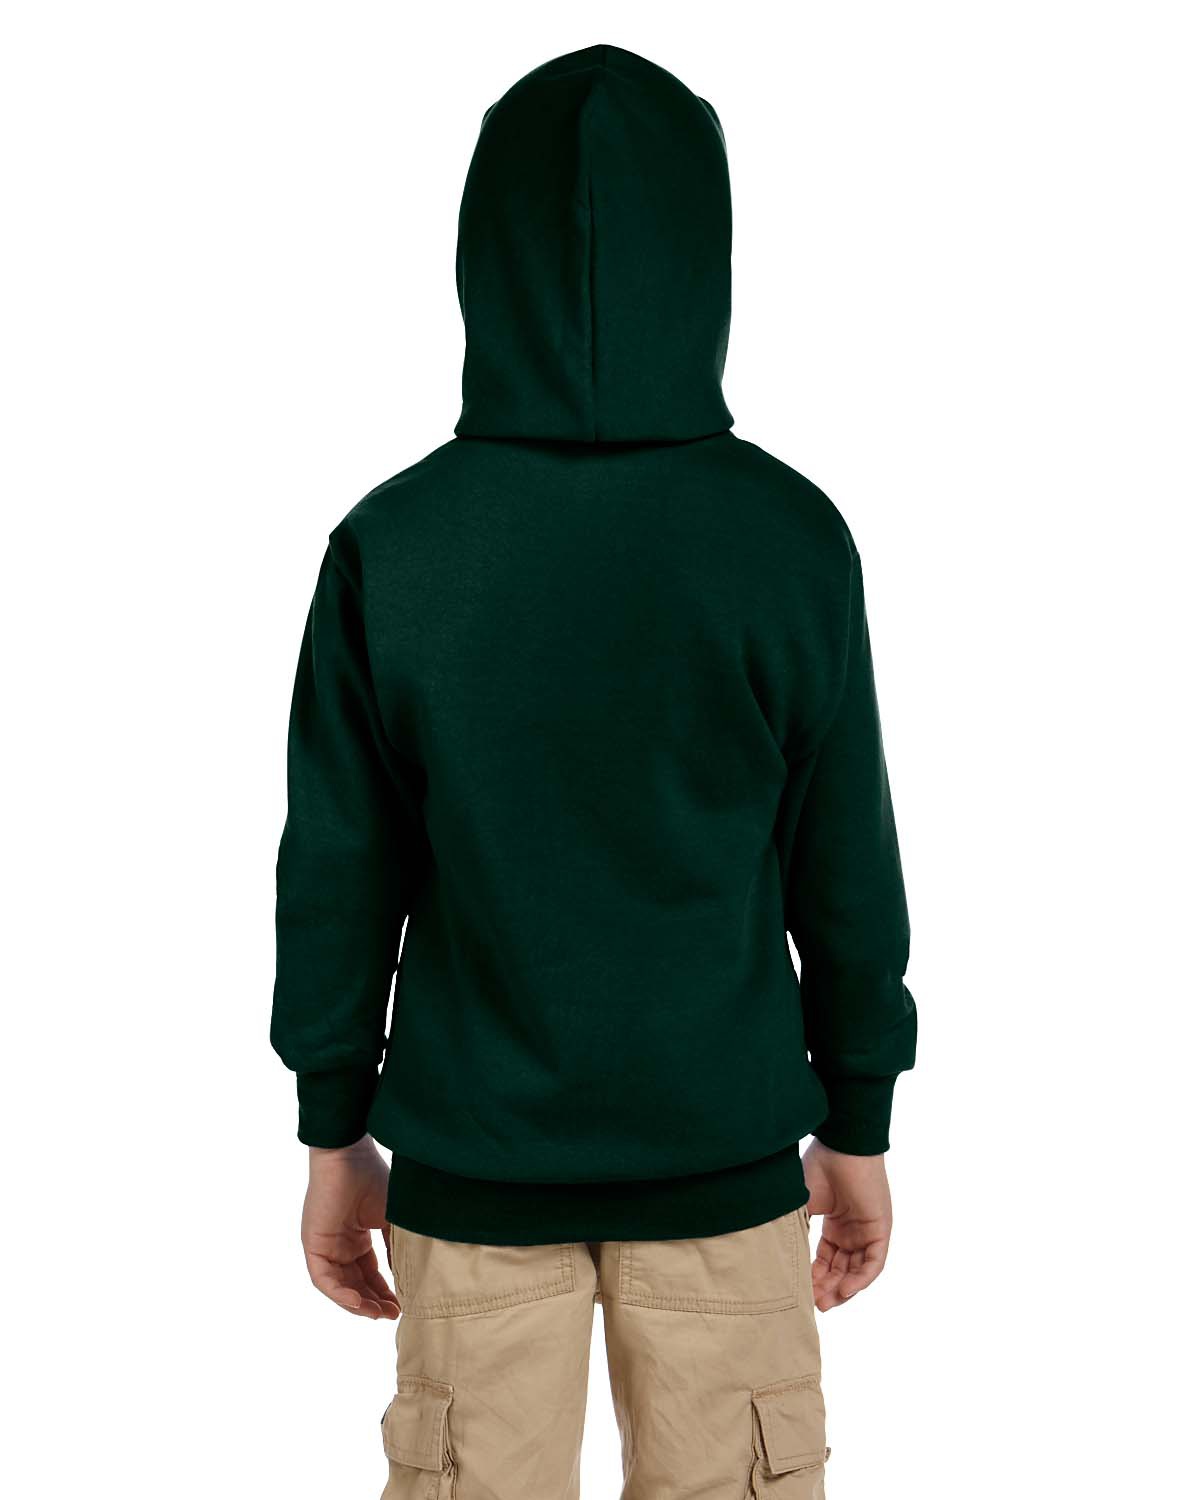 'Hanes P473 ComfortBlend Youth Pullover Hooded Sweatshirt'